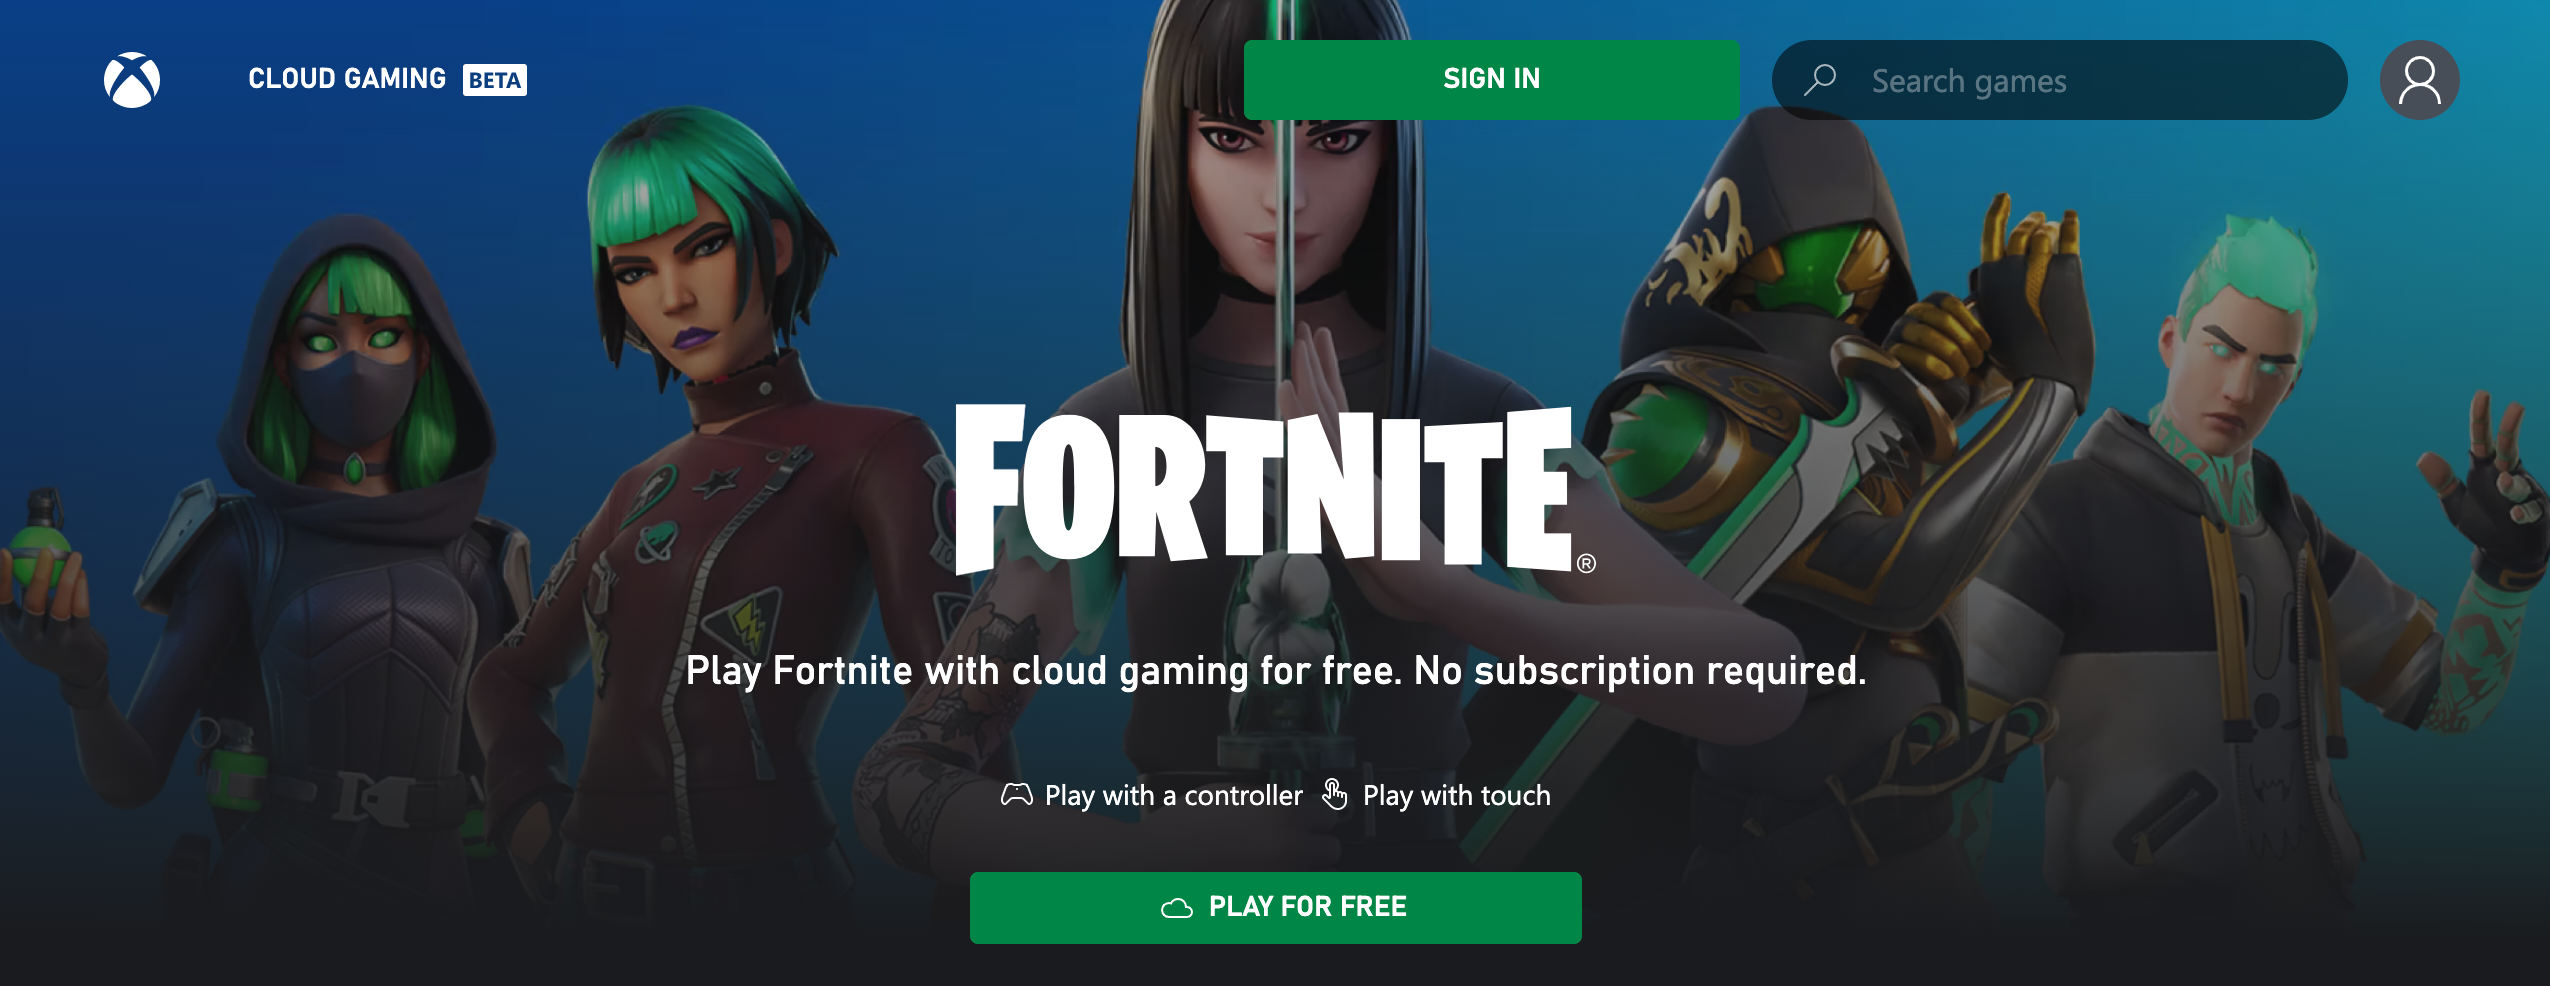 screenshot of fortnite play for free page